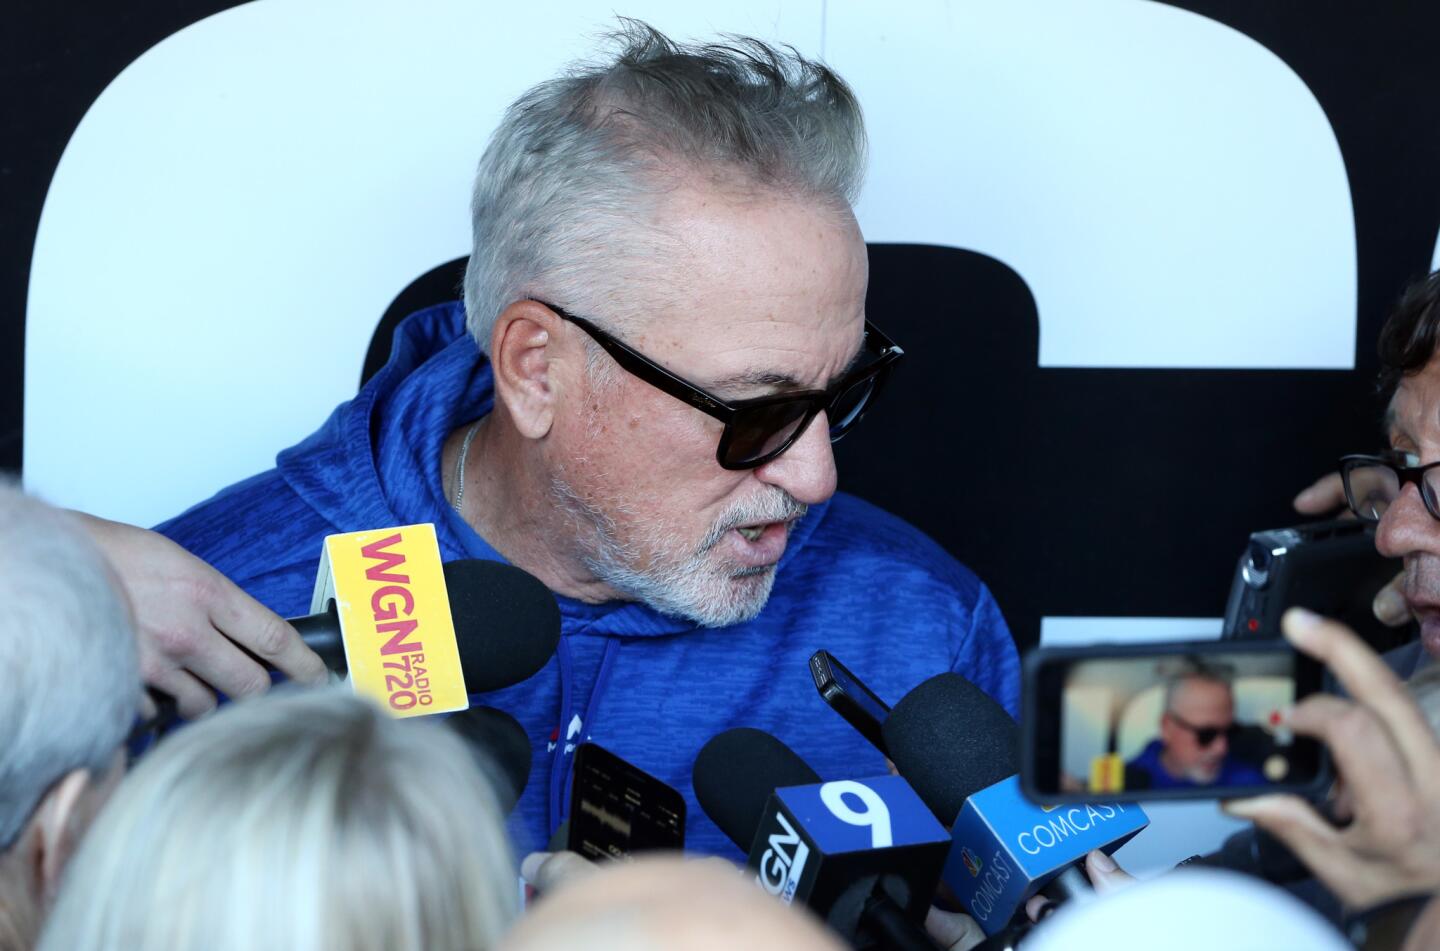 Cubs manager Joe Maddon sits in the dugout speaking with reporters before the start of the game between the Cubs and the White Sox at Guaranteed Rate Field on Saturday, Sept. 22, 2018.